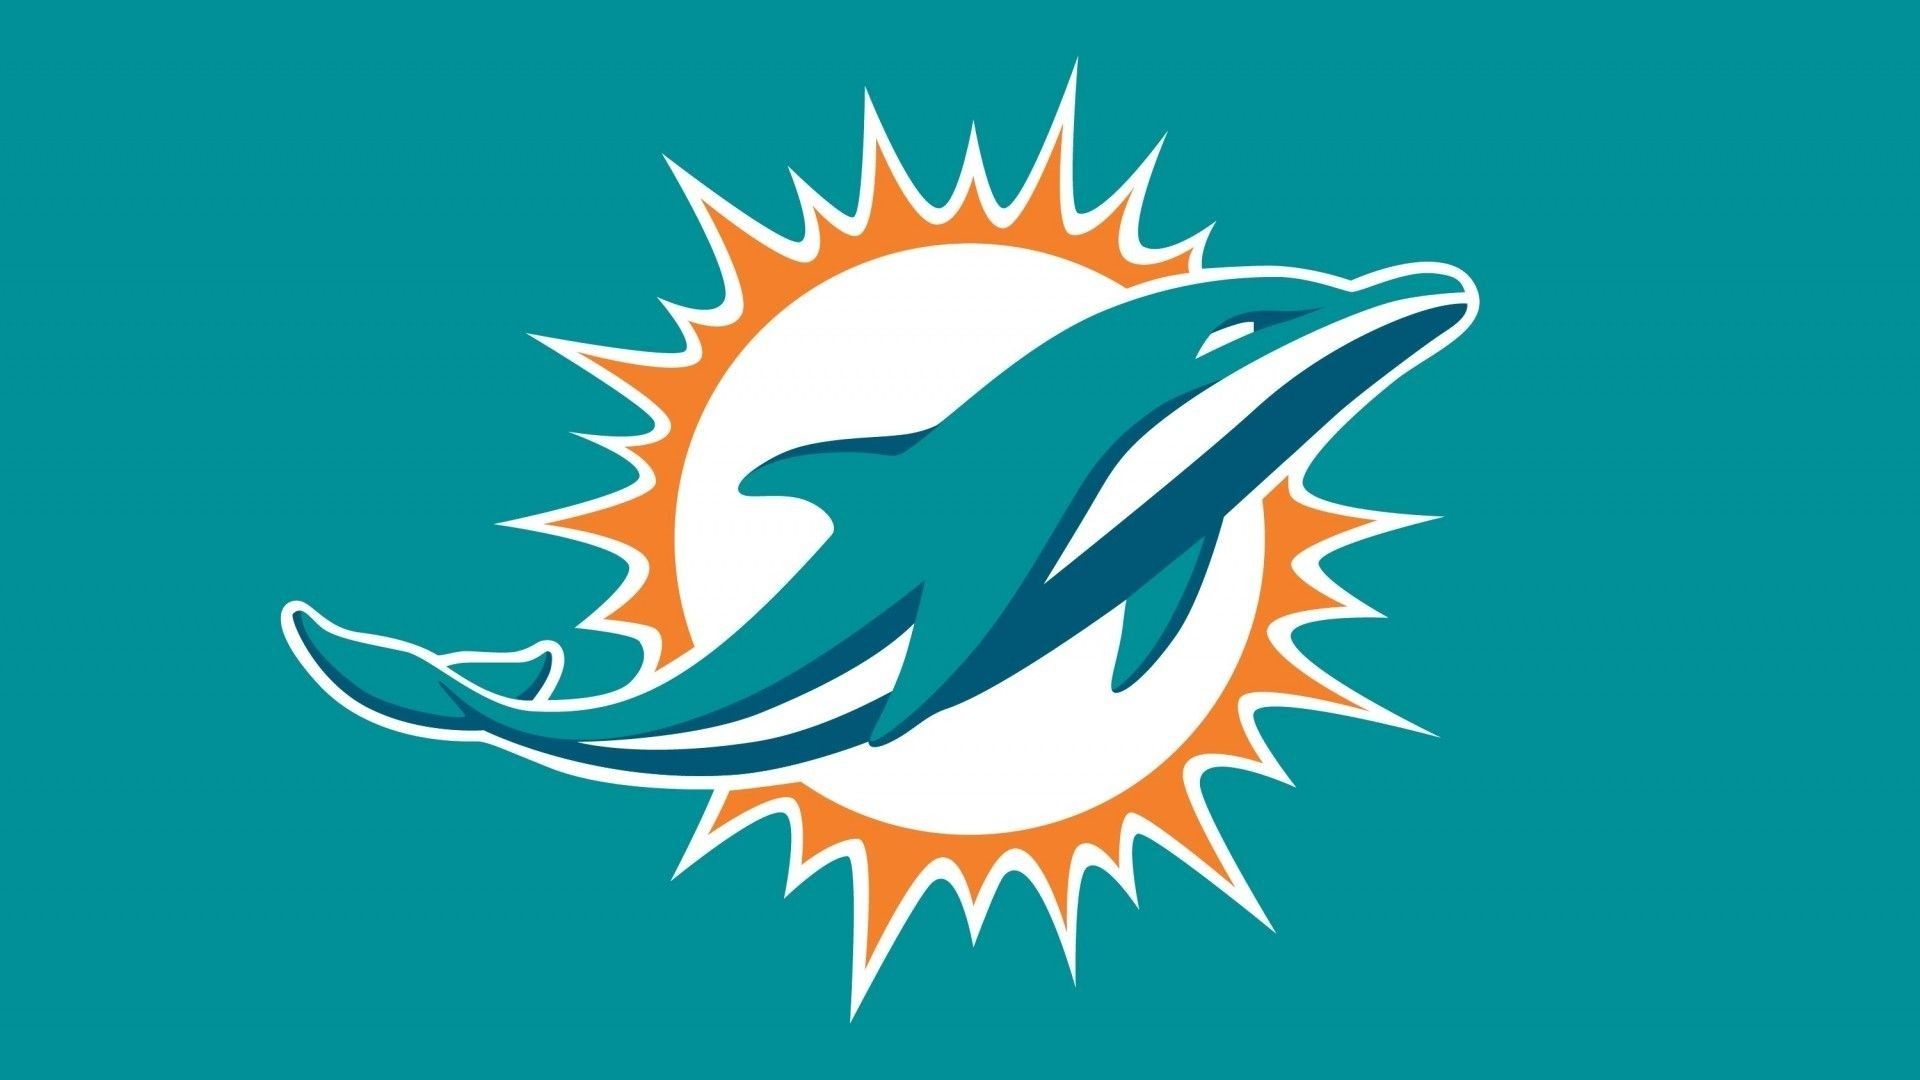 Miami Dolphins 2021 NFL Schedule, roster and live stream without Reddit